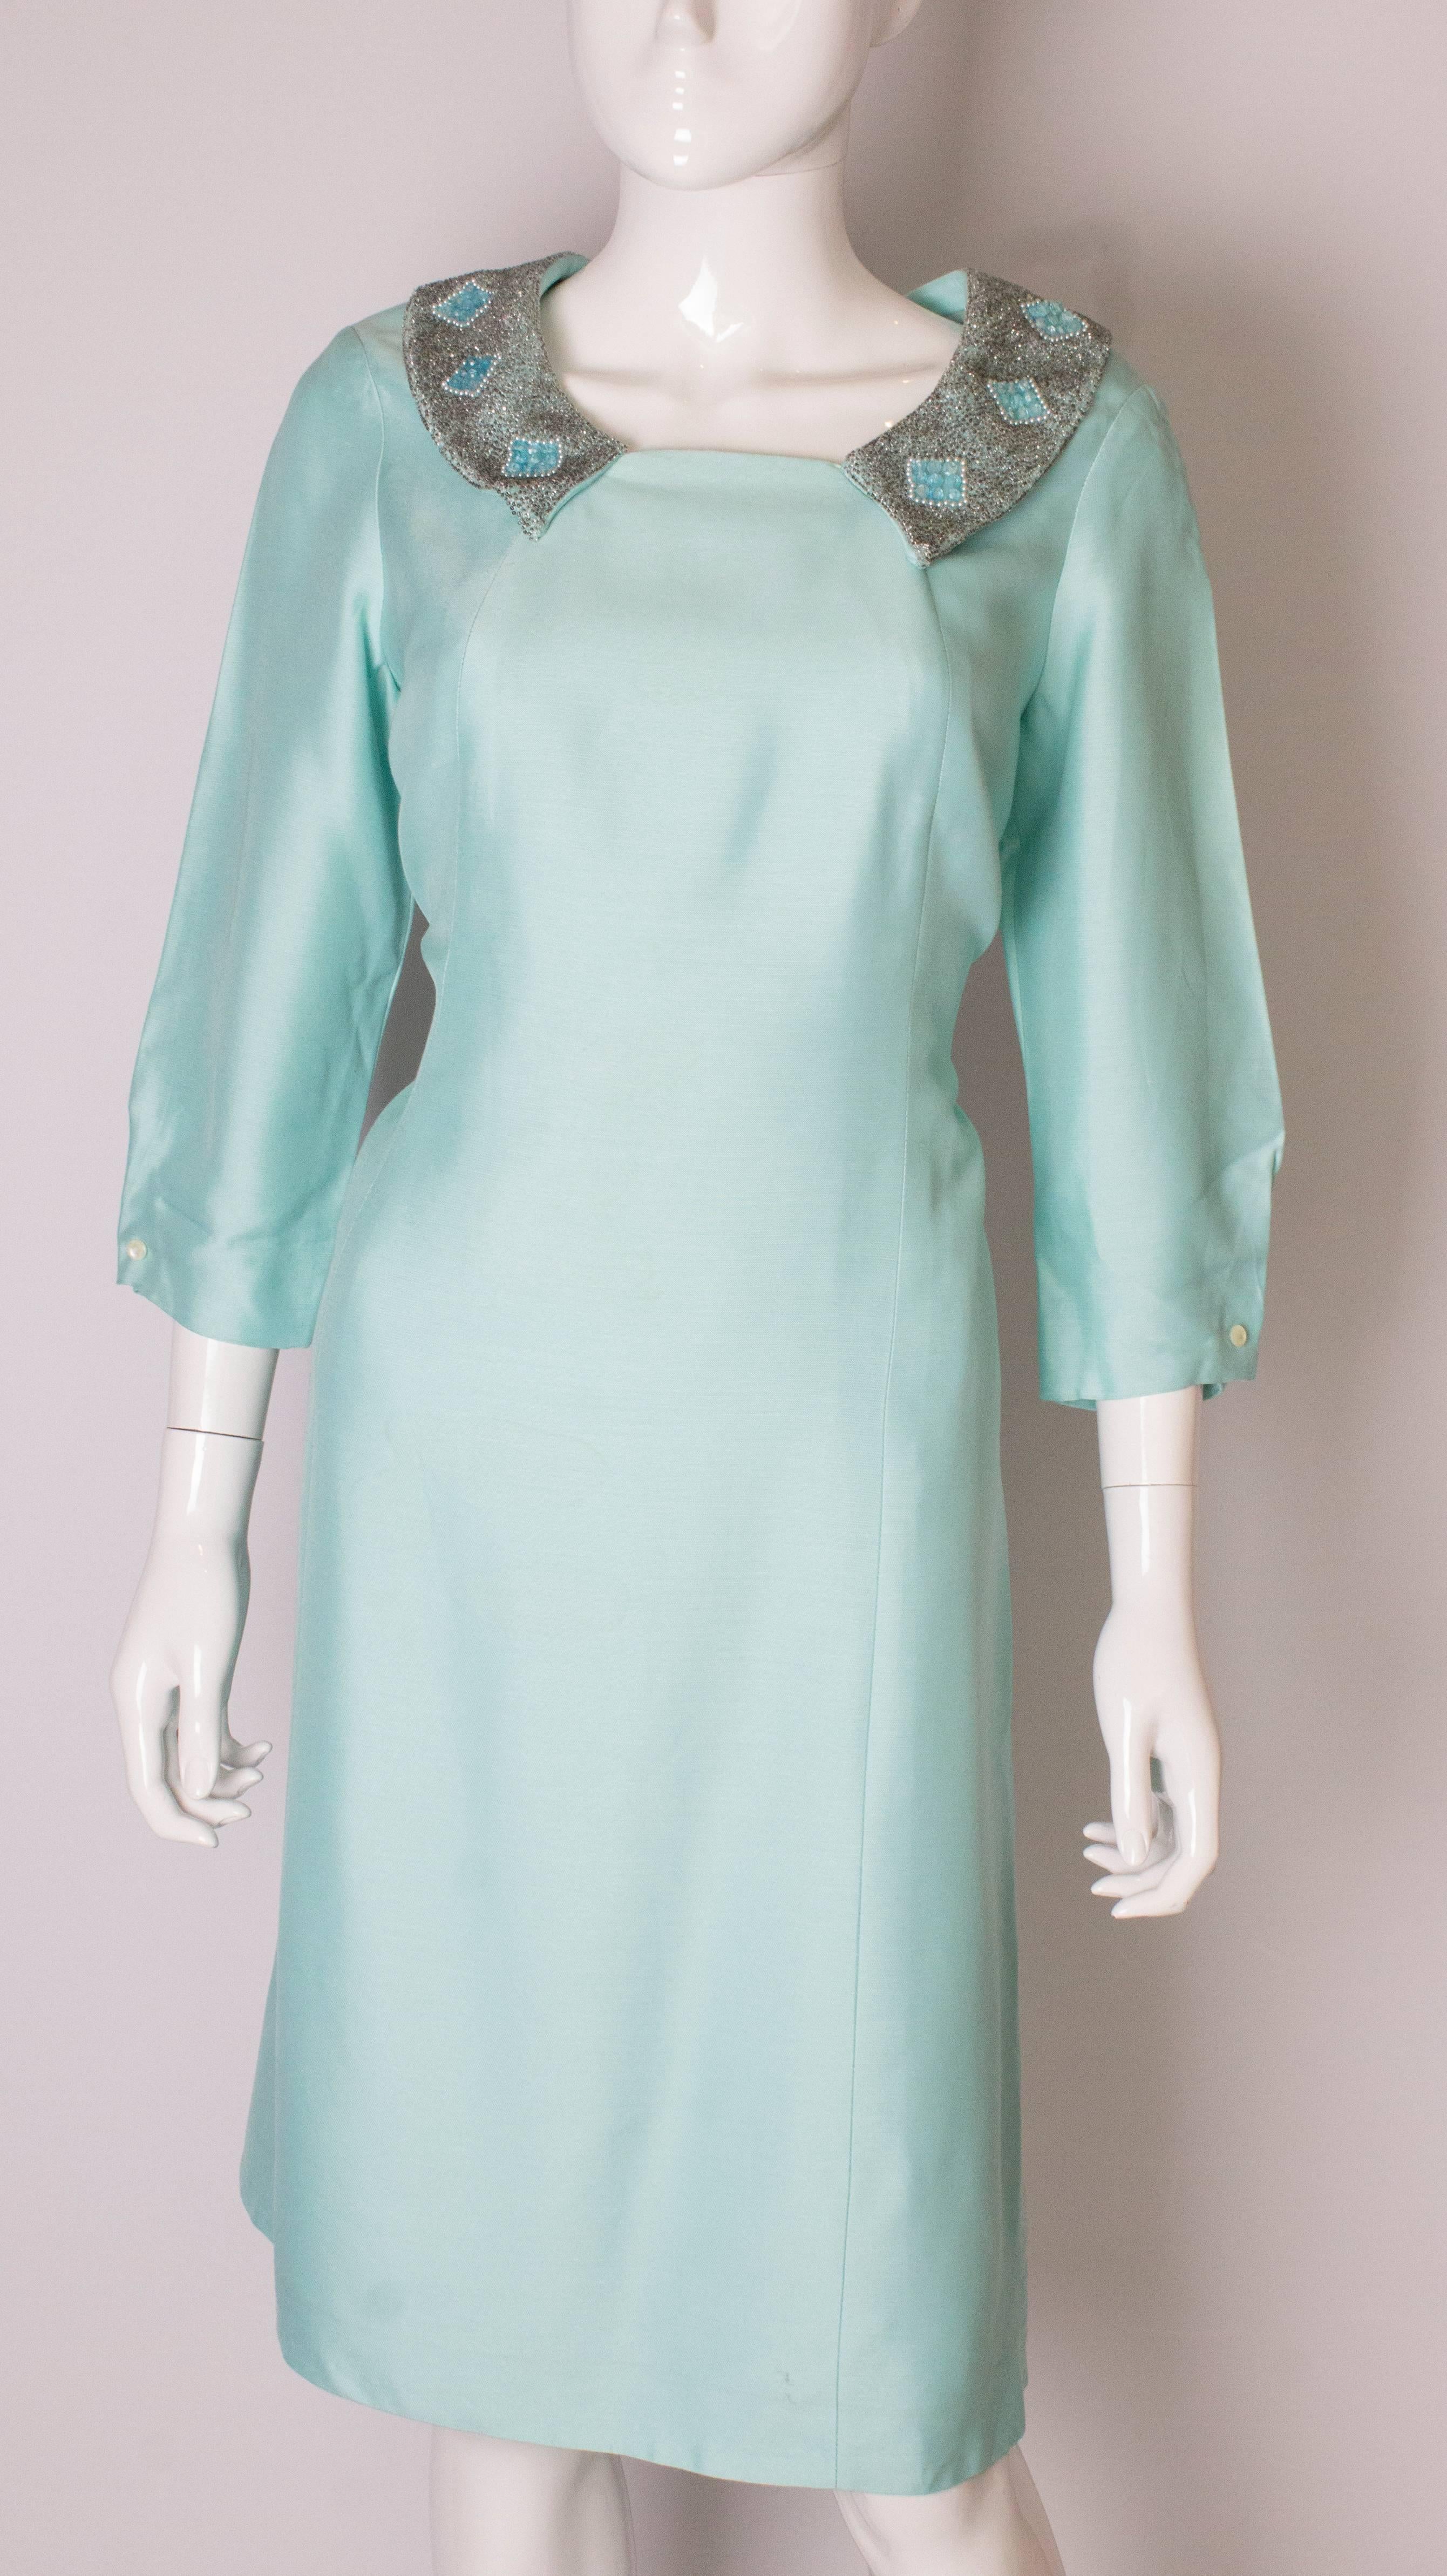 A lovely shift dress by Petite Francaise. In a pretty turquoise colour the dress has pretty beaded collar and elbow length sleeves. it is fully lined with a central back zip.